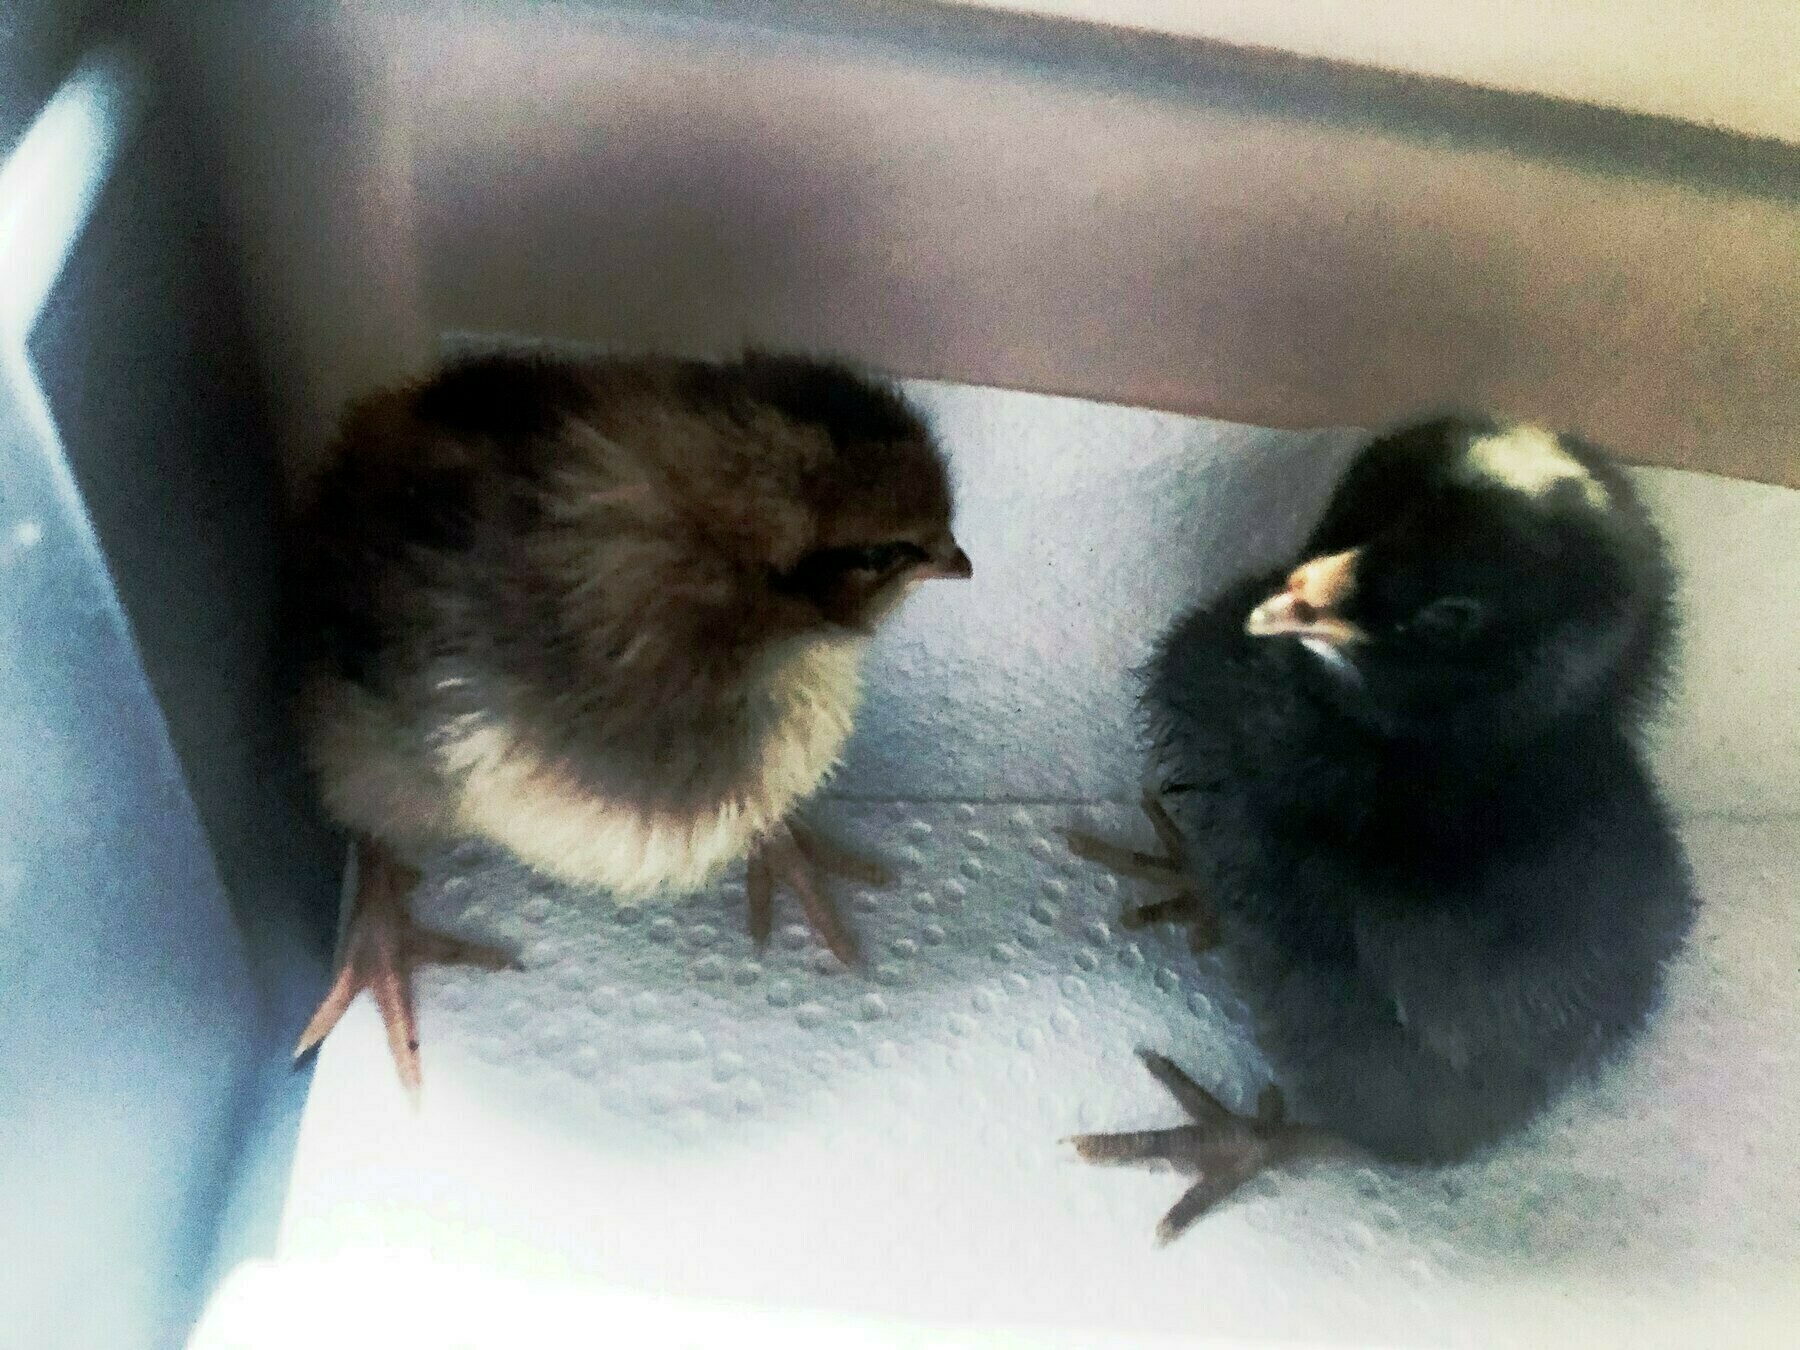 two baby chicken chicks, one black with splotches, one brown with black strips and caramel splotches